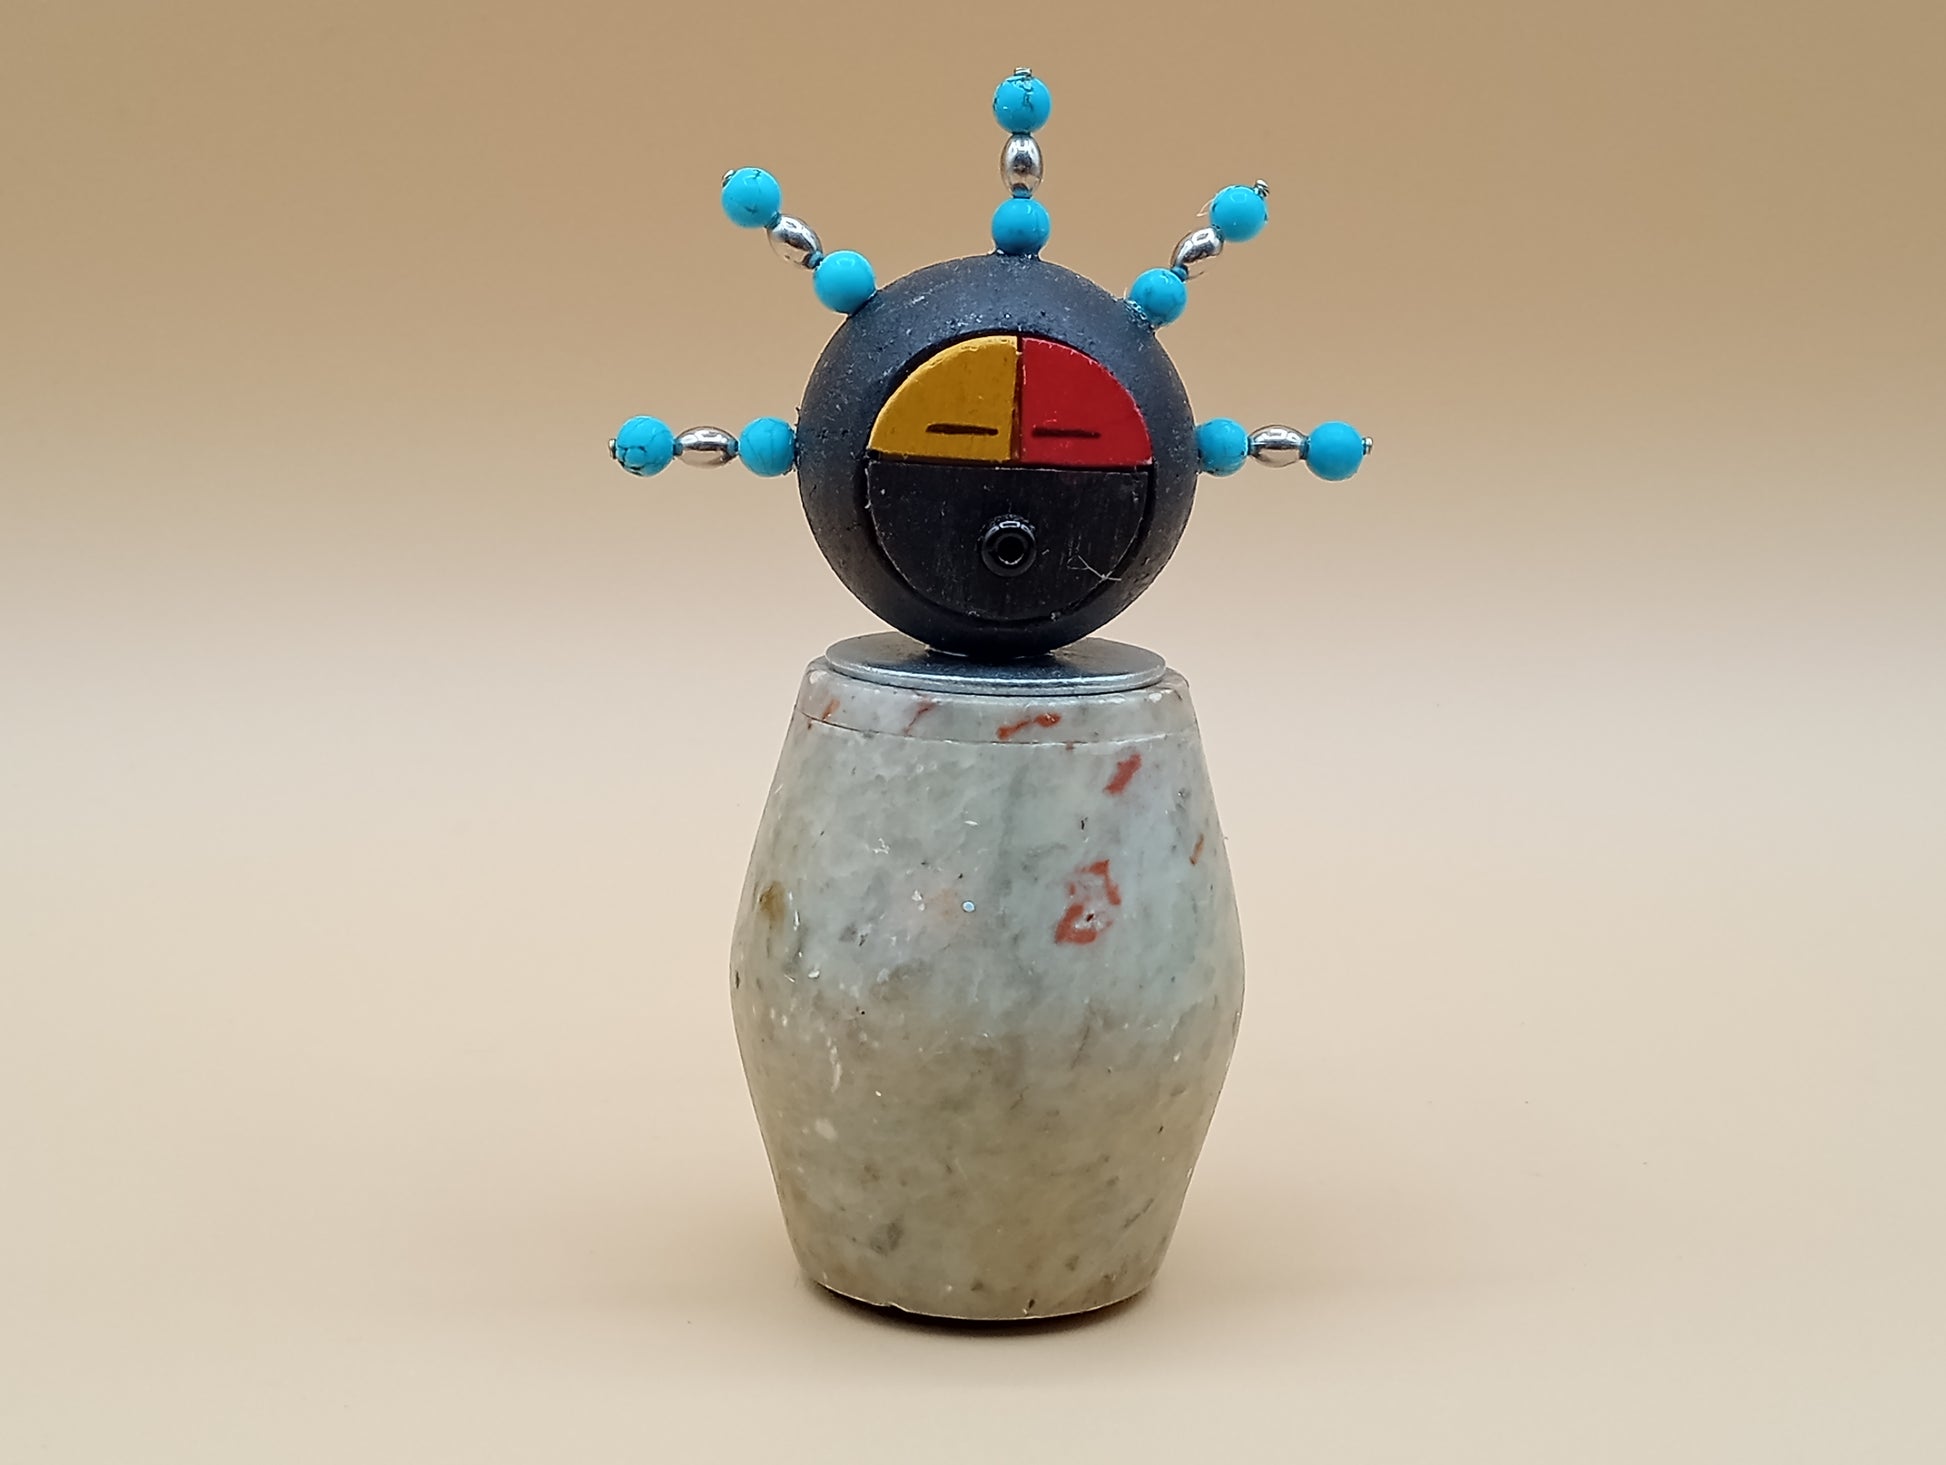 Small stone figure Yellow and red face Silver and turquoise hair